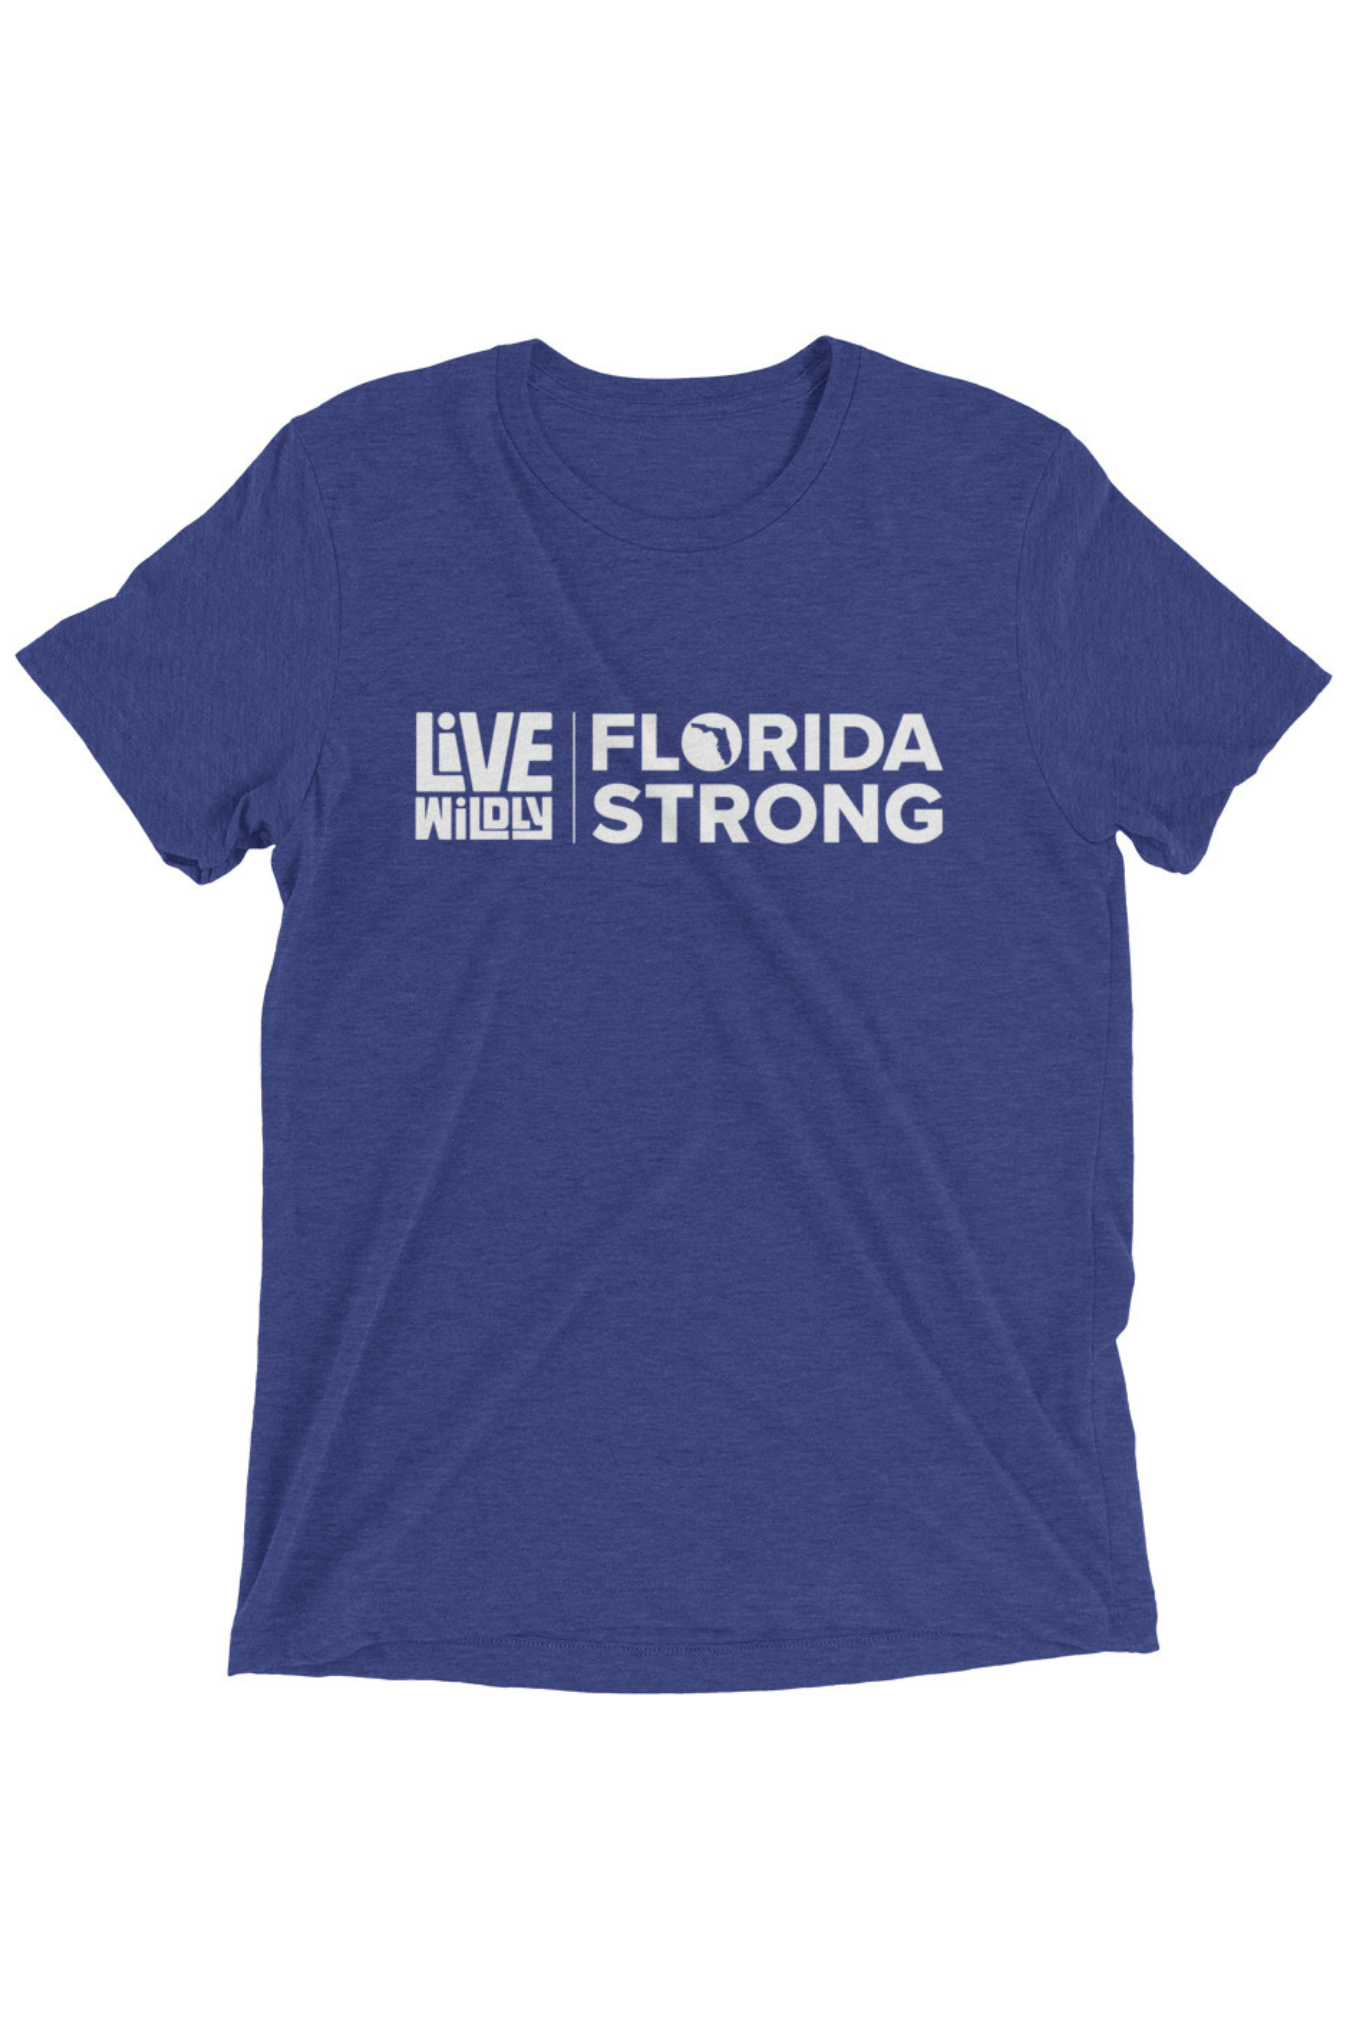 Florida Strong - Unisex Triblend Tee - Front - Laid Out -Live Wildly 